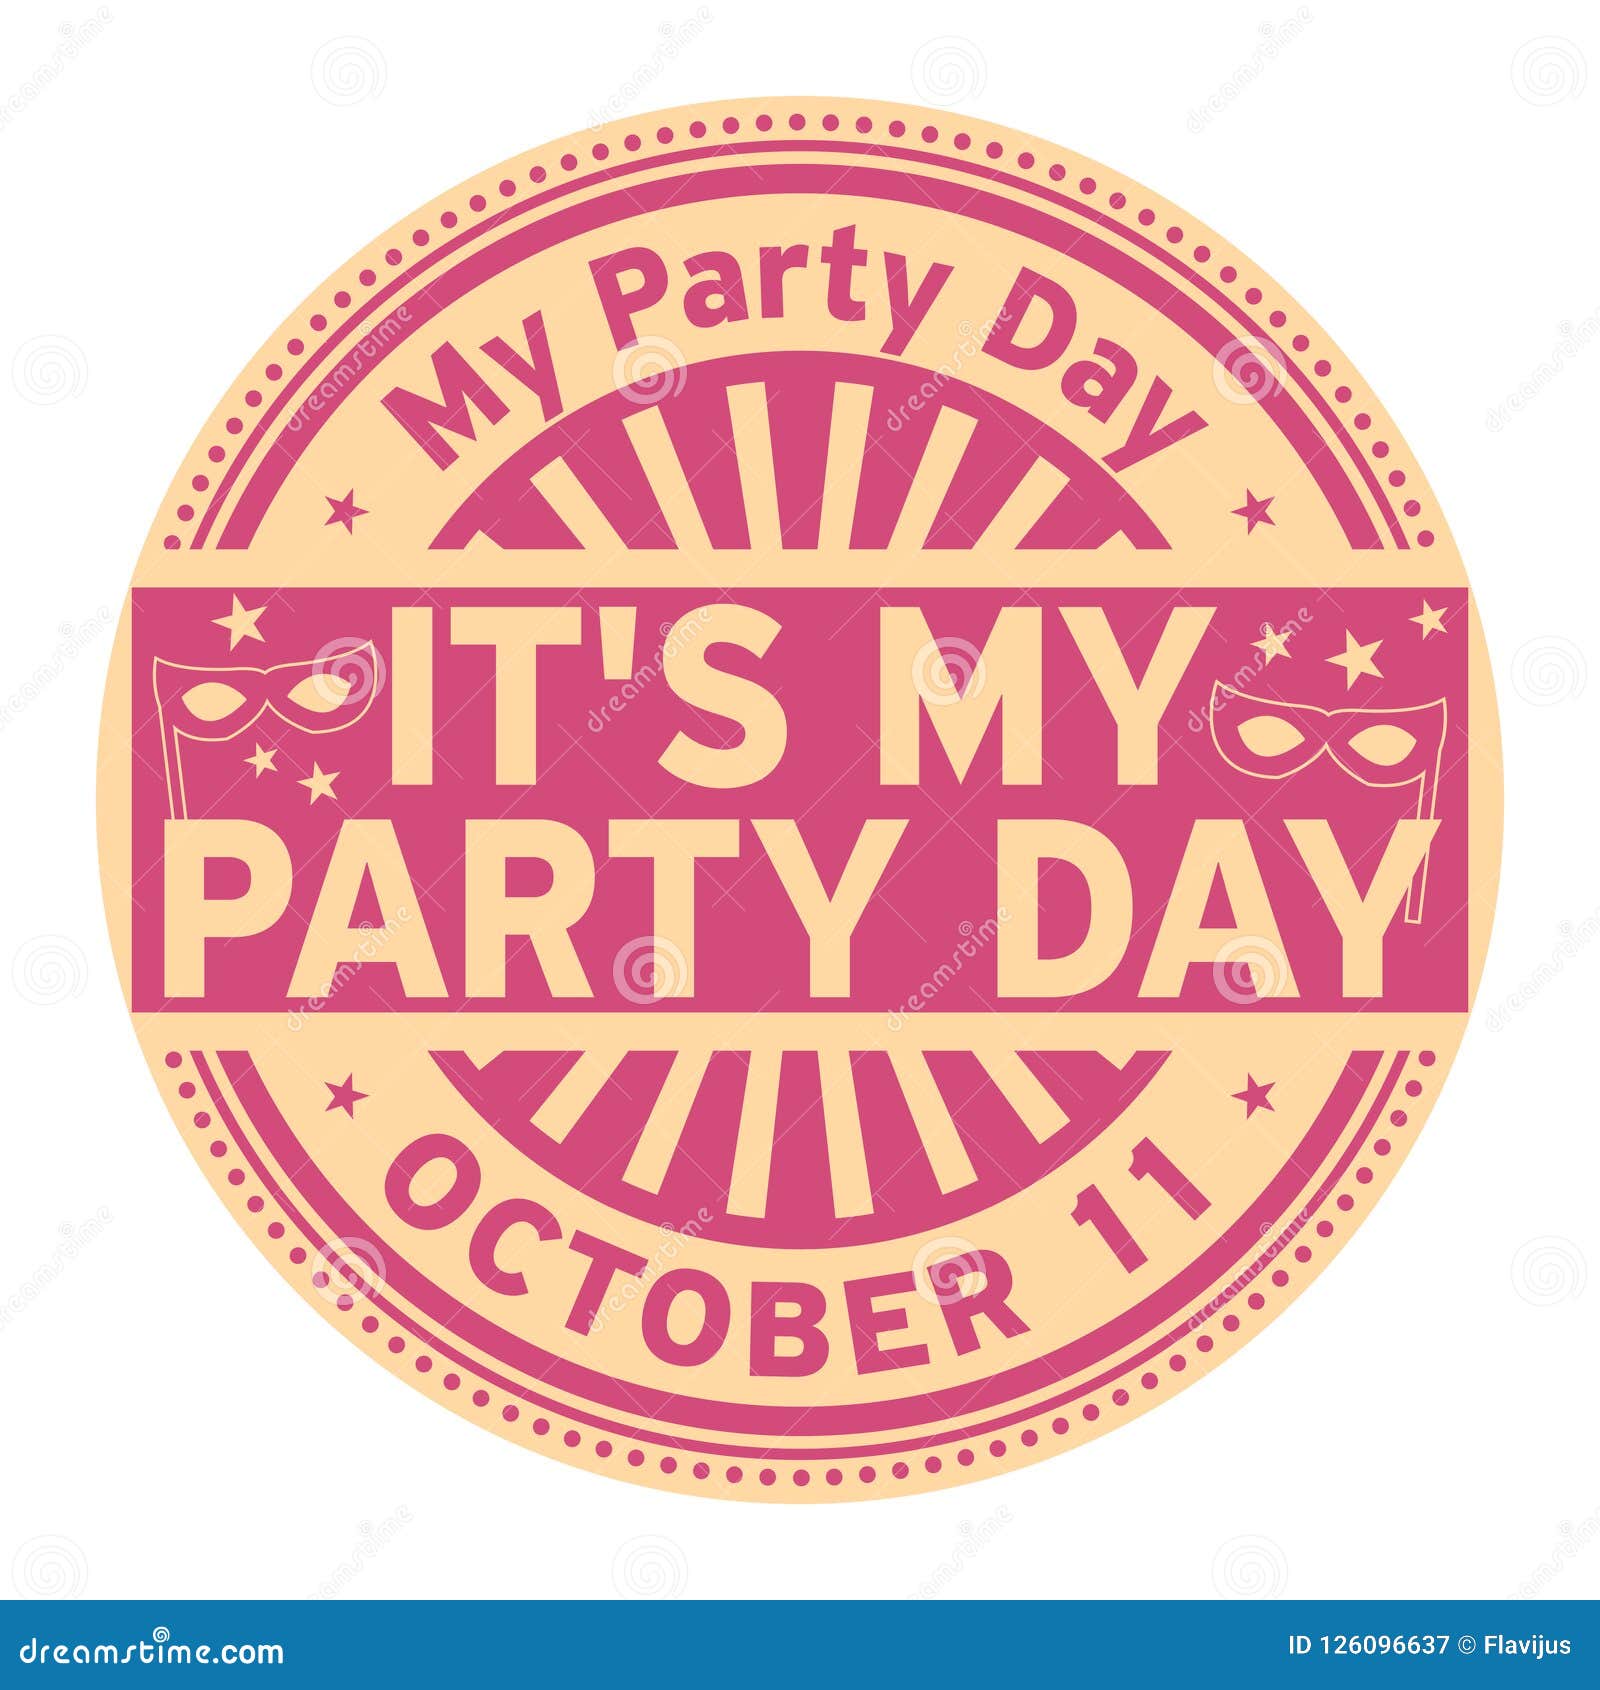 ItS My Party